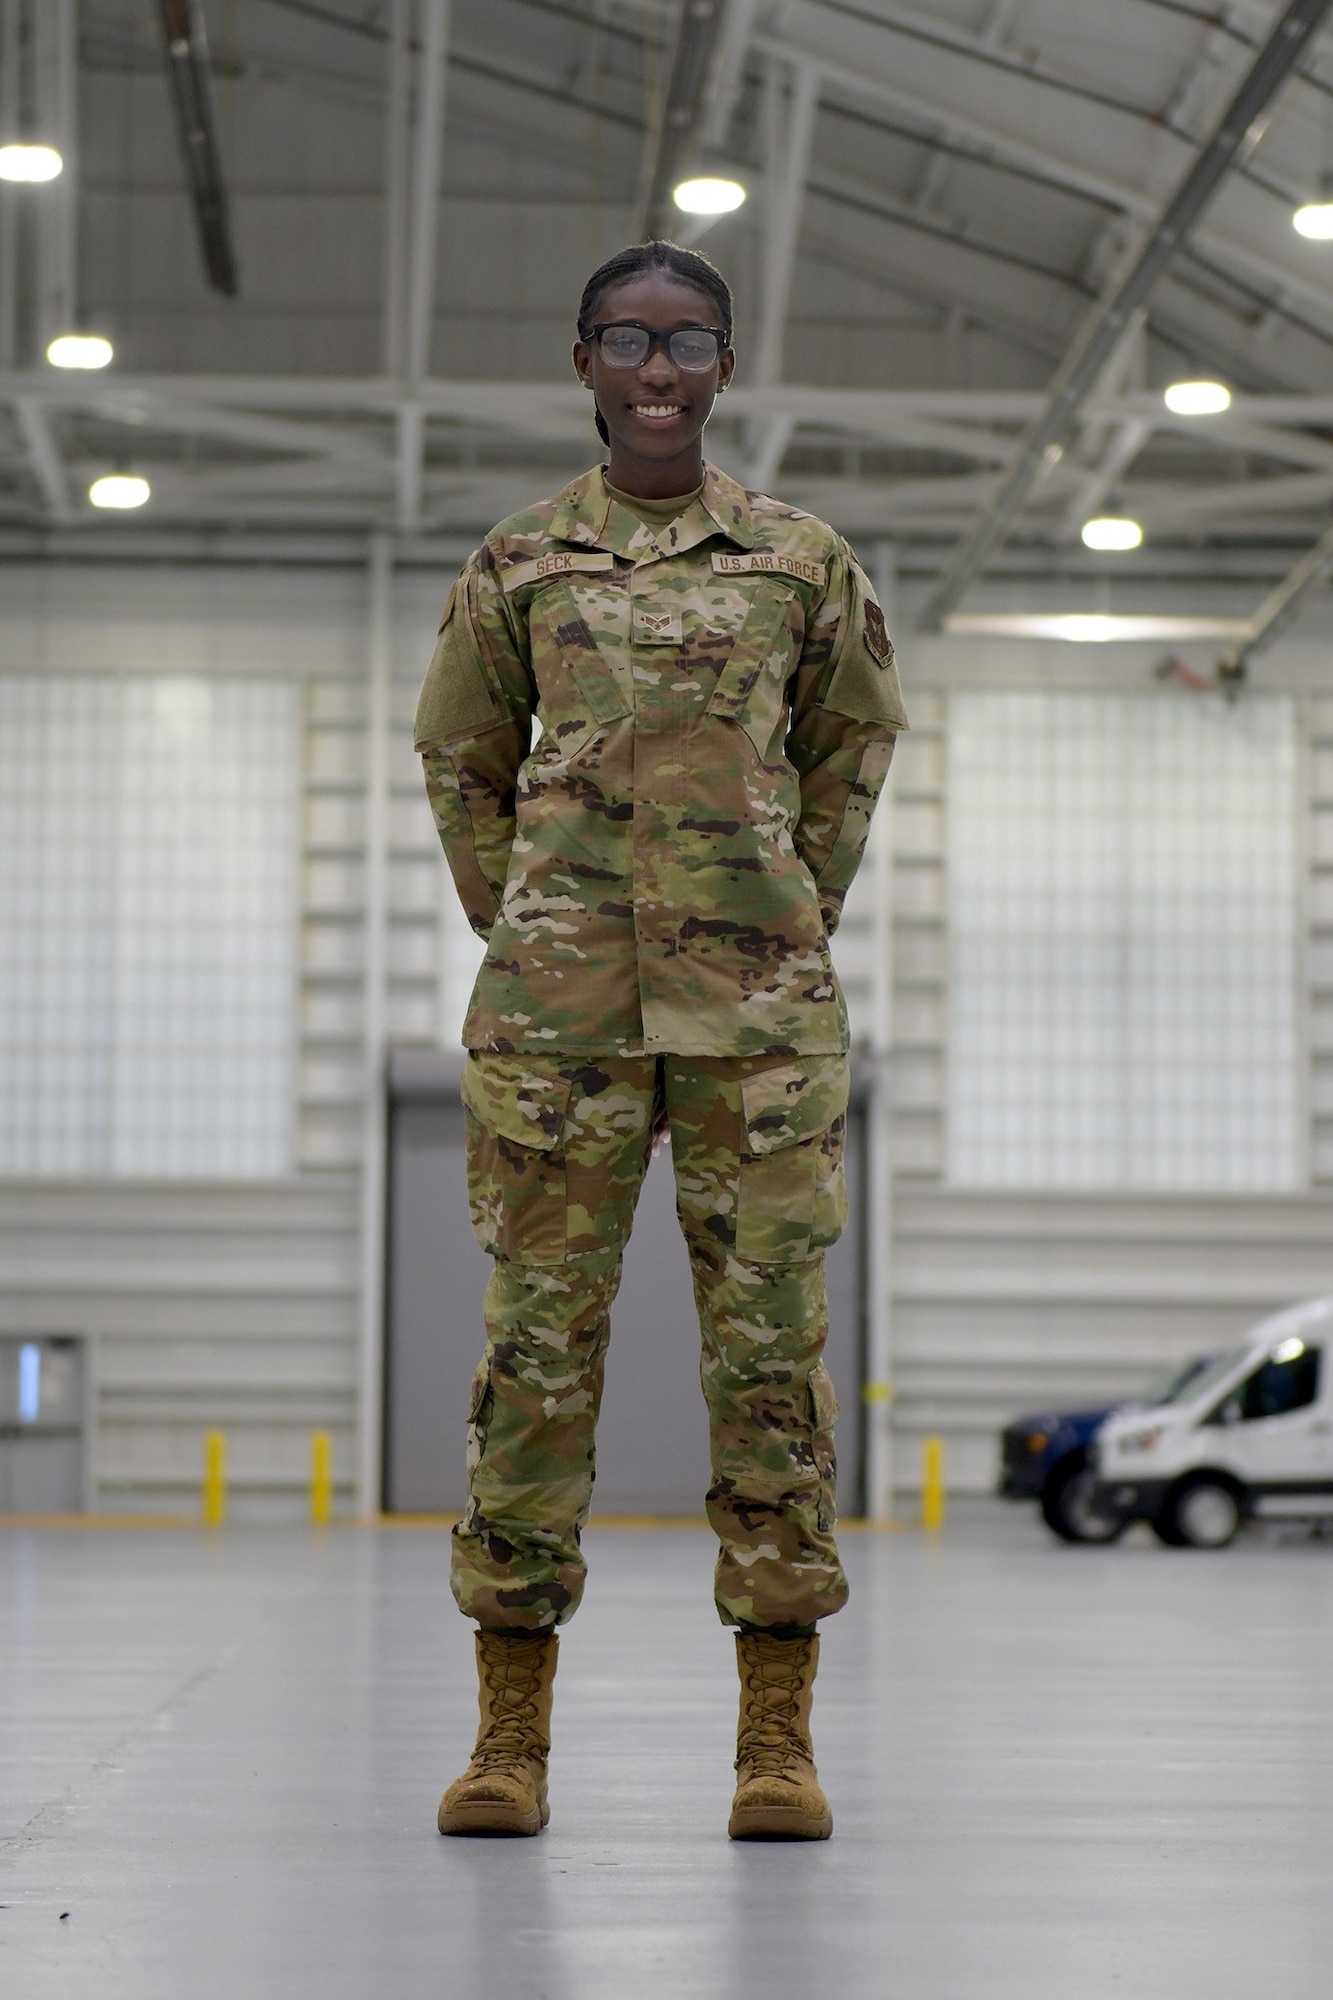 Senior Airman Diass Seck poses for a photo at Westover Air Reserve Base in Massachusetts.